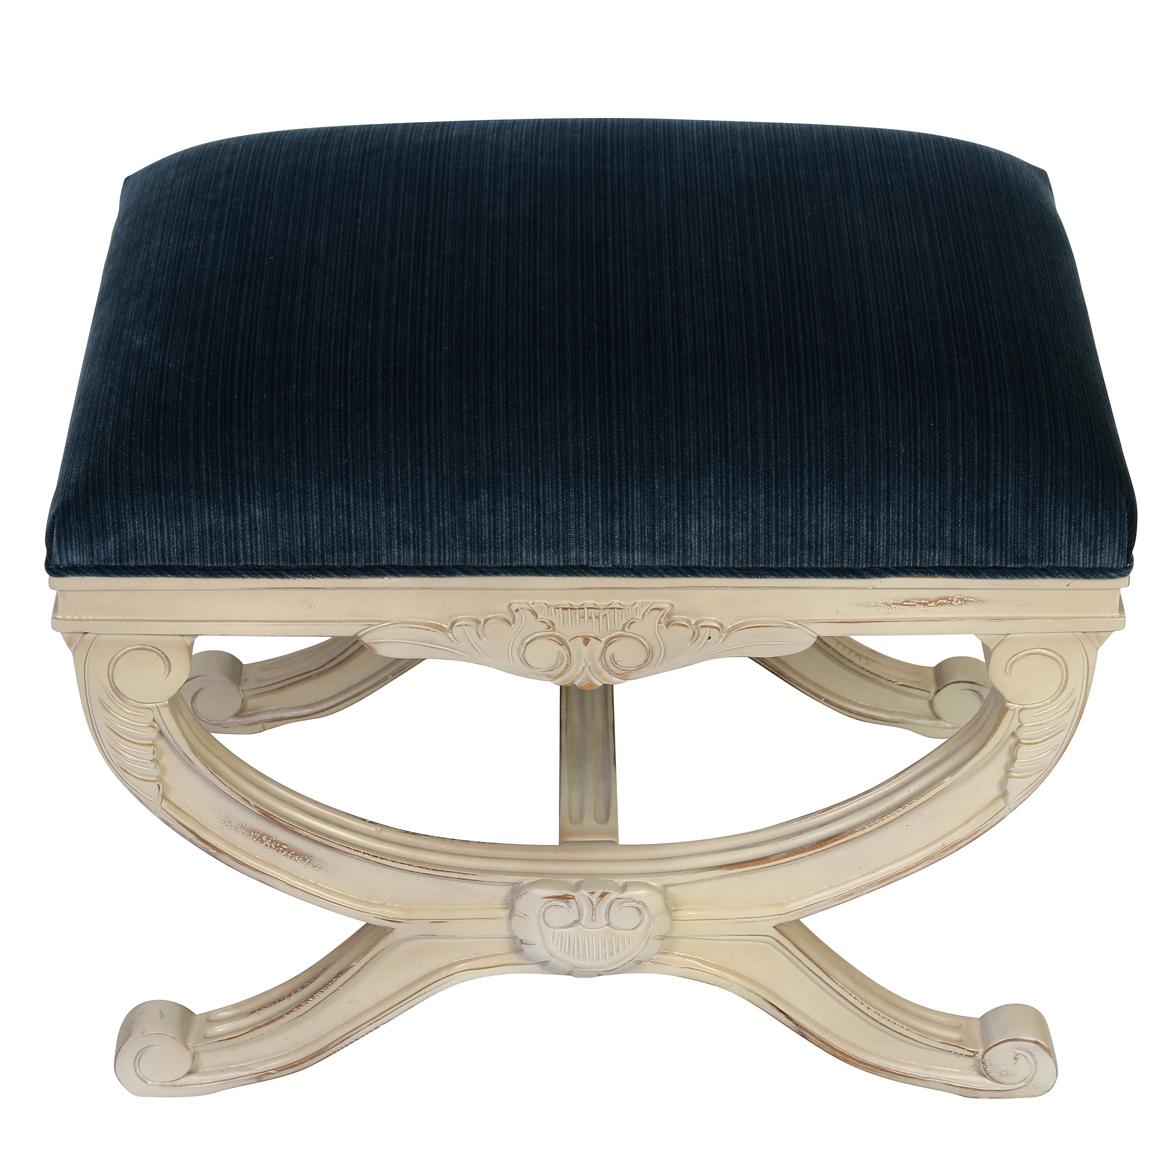 A pair of newly reupholstred blue strie velvet Regency style curule shape stools crafted with detail. These stools feature a carved and painted X-form base that adds an element of sophistication to any room. The distinctive curule shape, a hallmark